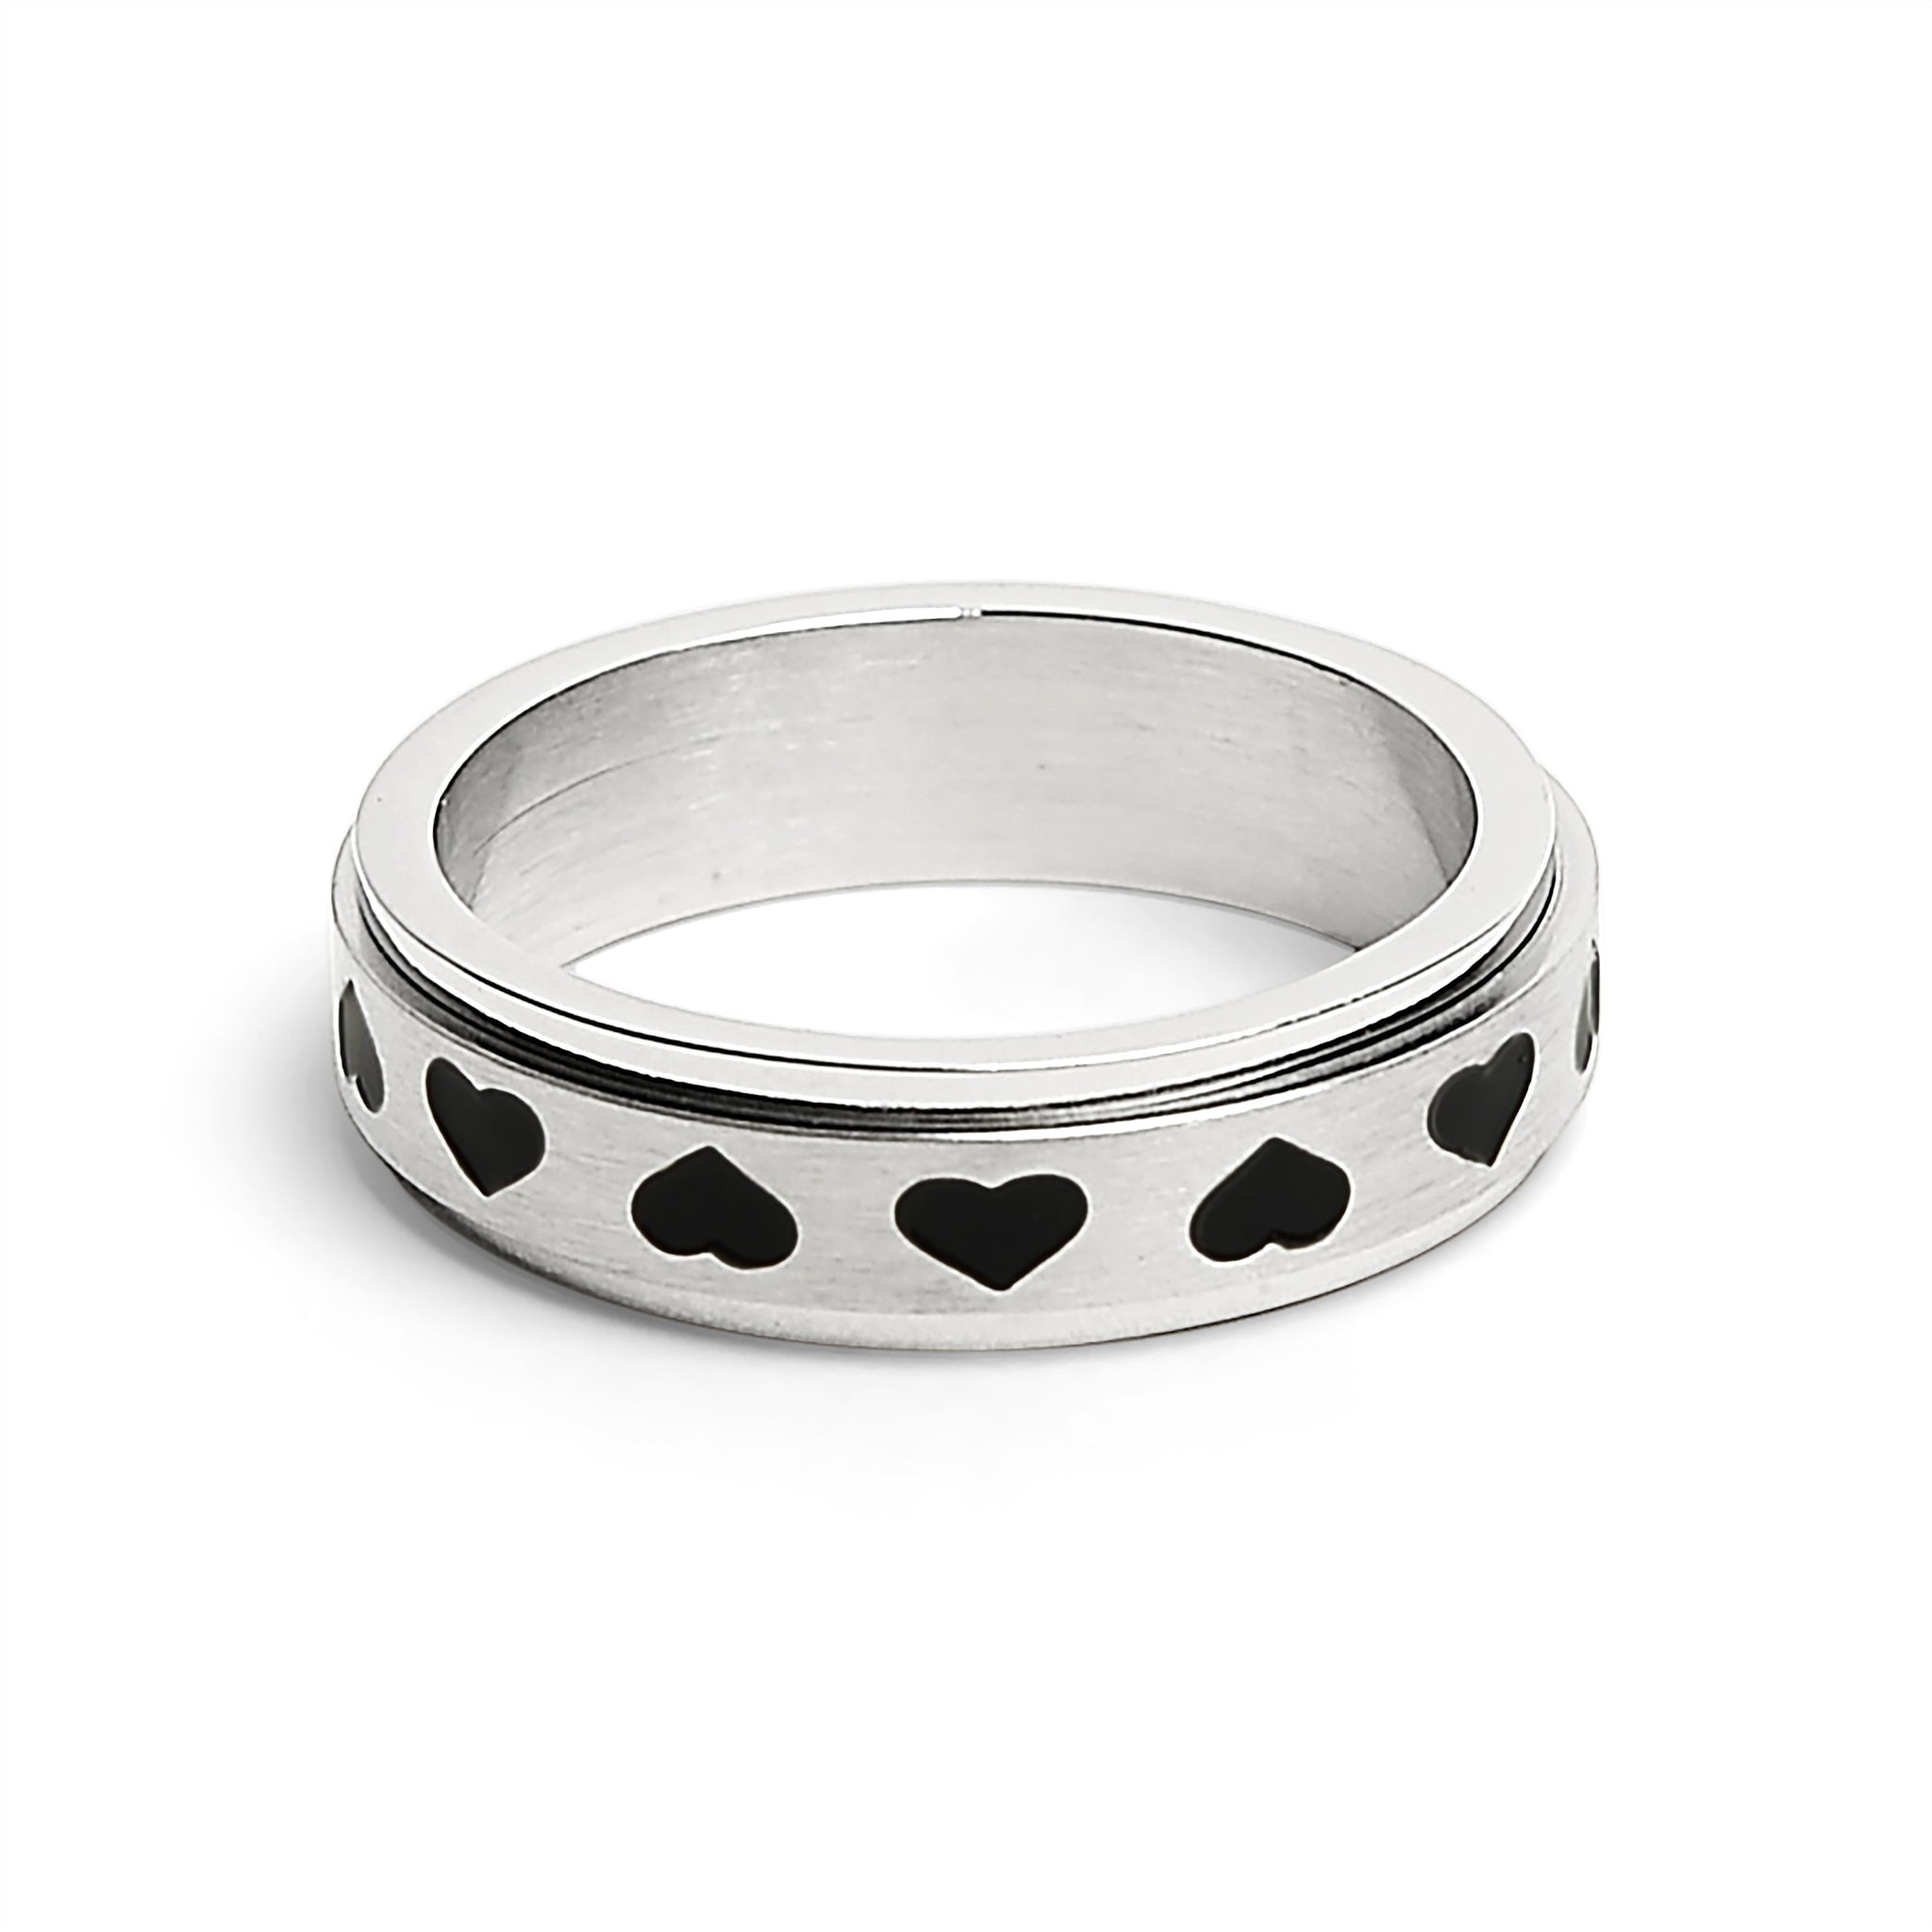 Polished Black Hearts Stainless Steel Spinner Ring - Fidget Jewelry for Women - 5mm Width - Jewelry & Watches - Bijou Her -  -  - 